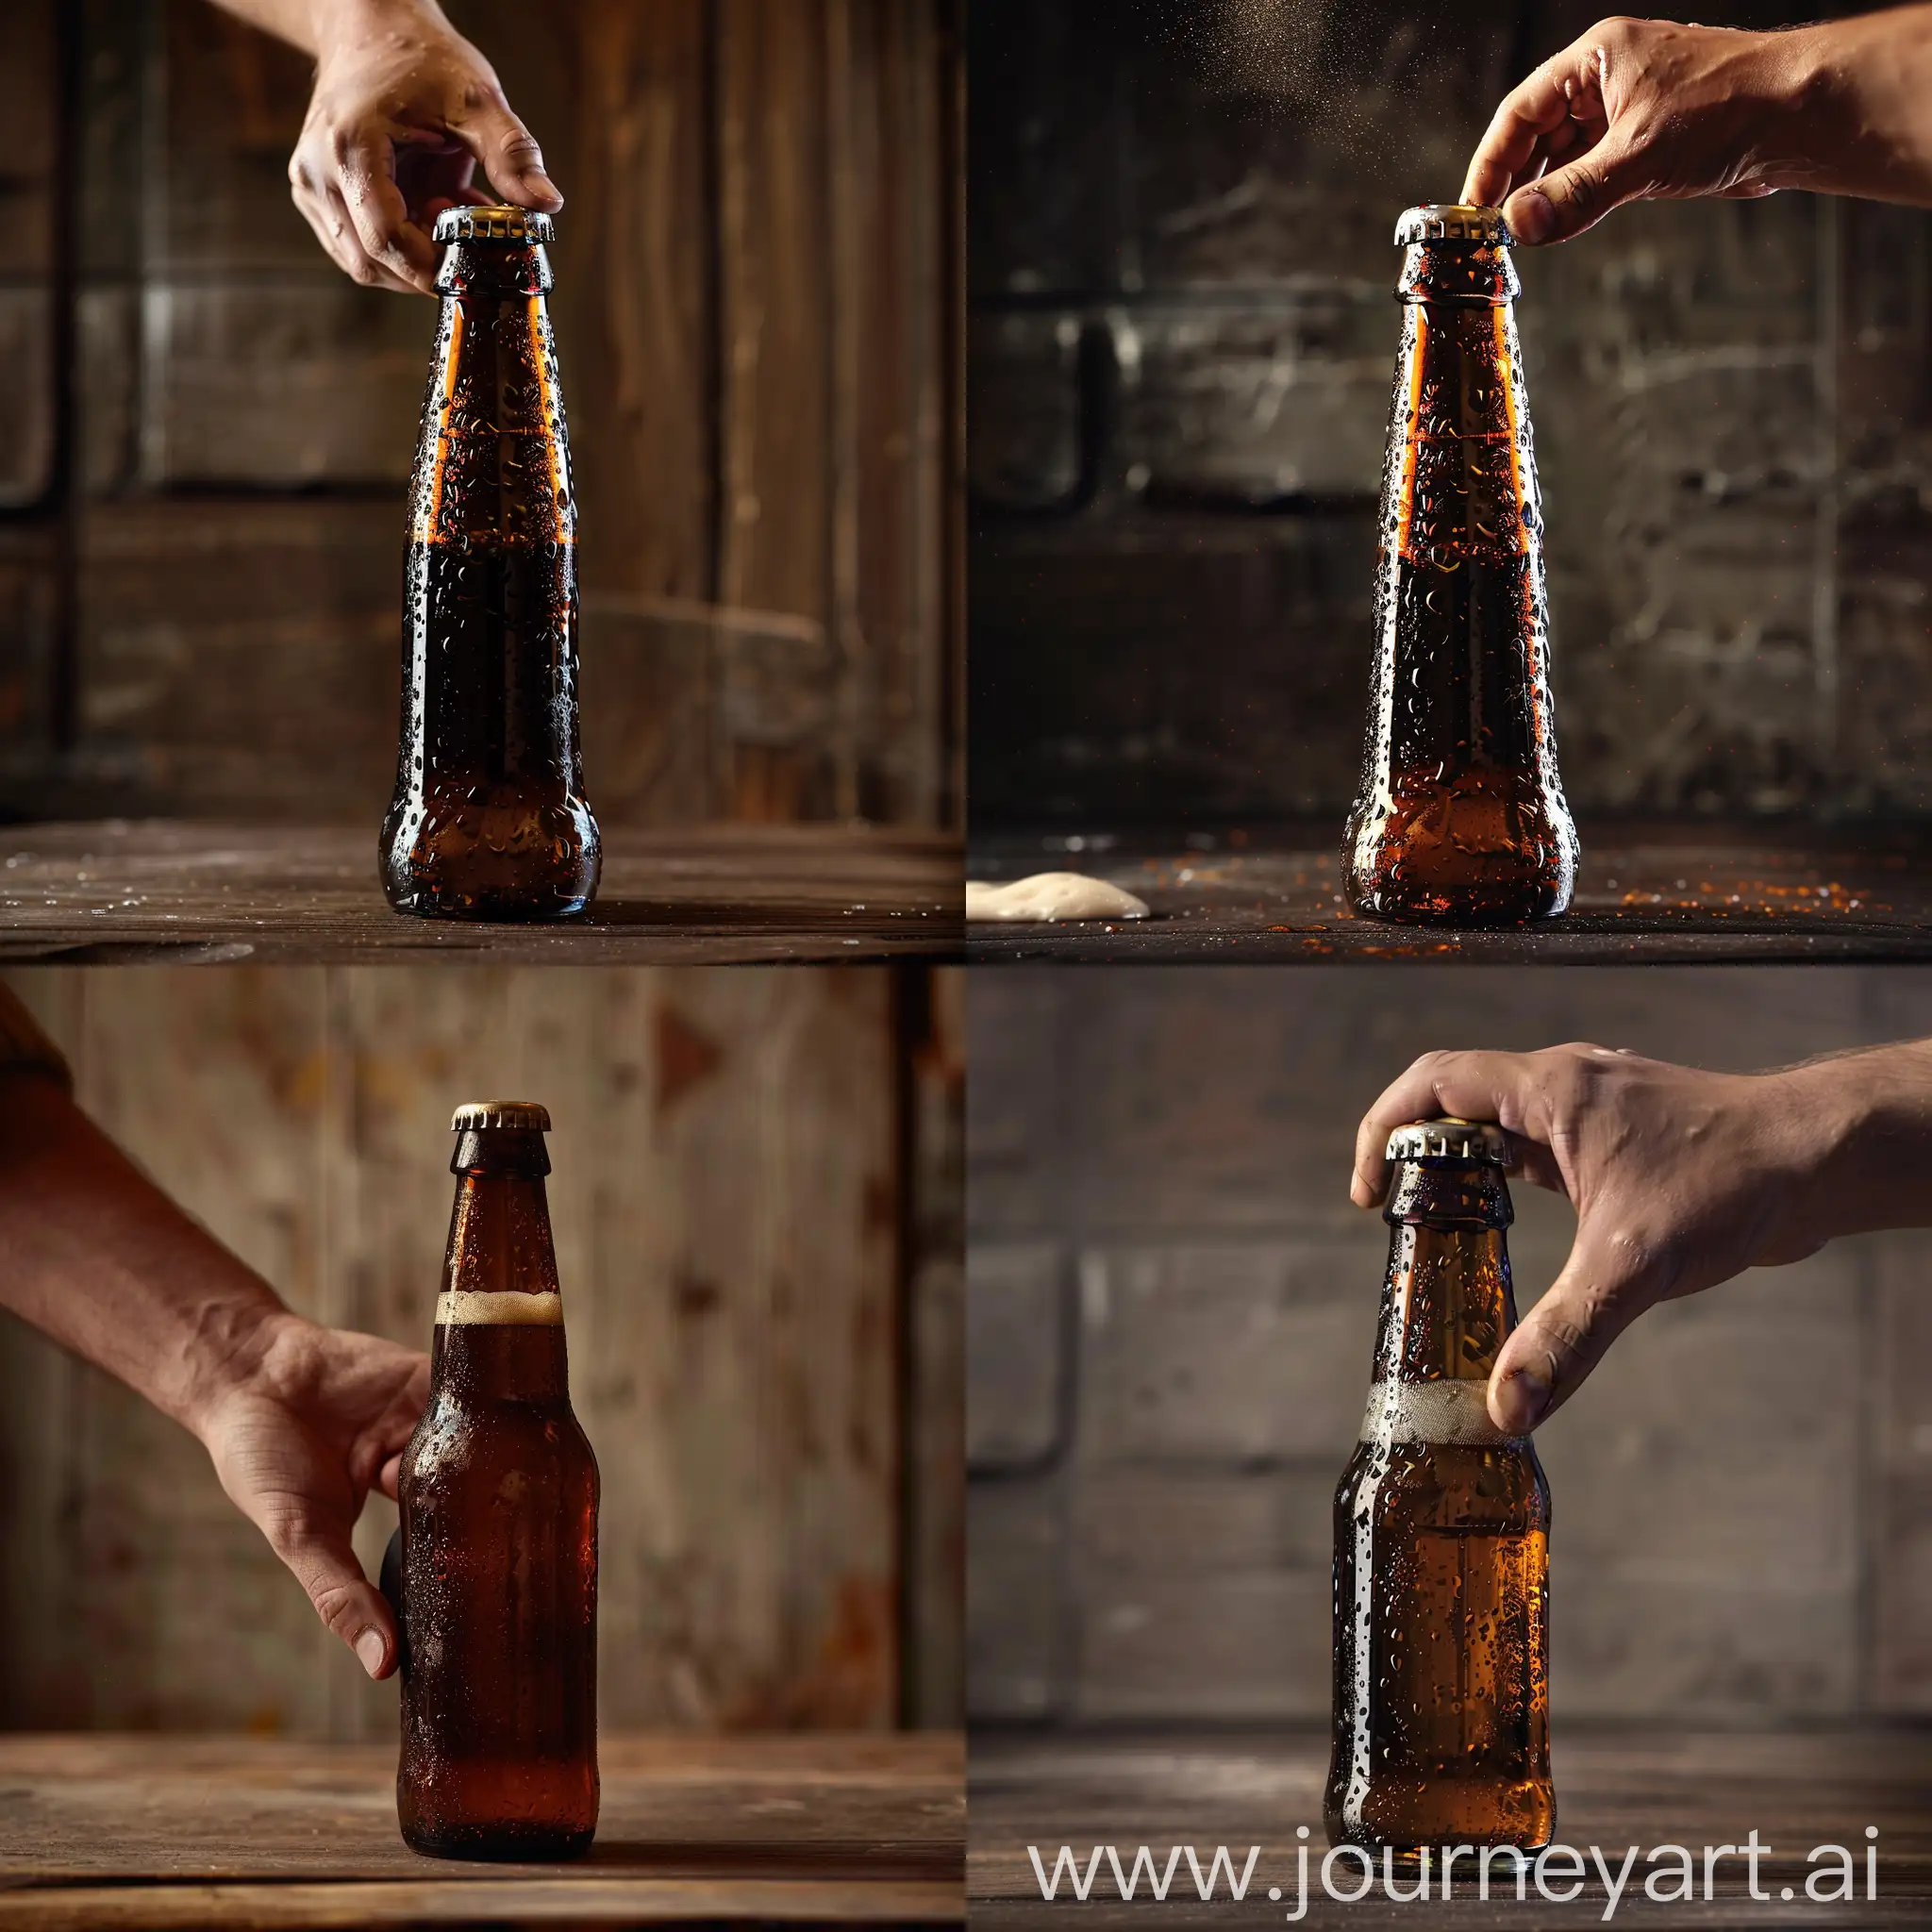 In this captivating front-view scene, a hand is shown in the process of opening a bottle of beer. The bottle, held steadily in one hand, features a label with a bold and modern design that reflects the brand's unique identity. As the bottle is opened, the anticipation of the moment is palpable.
The beer inside the bottle shimmers with golden hues, its bubbles dancing excitedly in the light. The effervescence and froth of the beer create a dynamic visual effect, enhancing the atmosphere of energy and vibrancy in the scene.
The combination of the bottle's design, the beer's lively carbonation, and the act of opening the bottle generates an ambiance of celebration and camaraderie—a visual representation of the joy and connection experienced when sharing a drink with friends and loved ones.